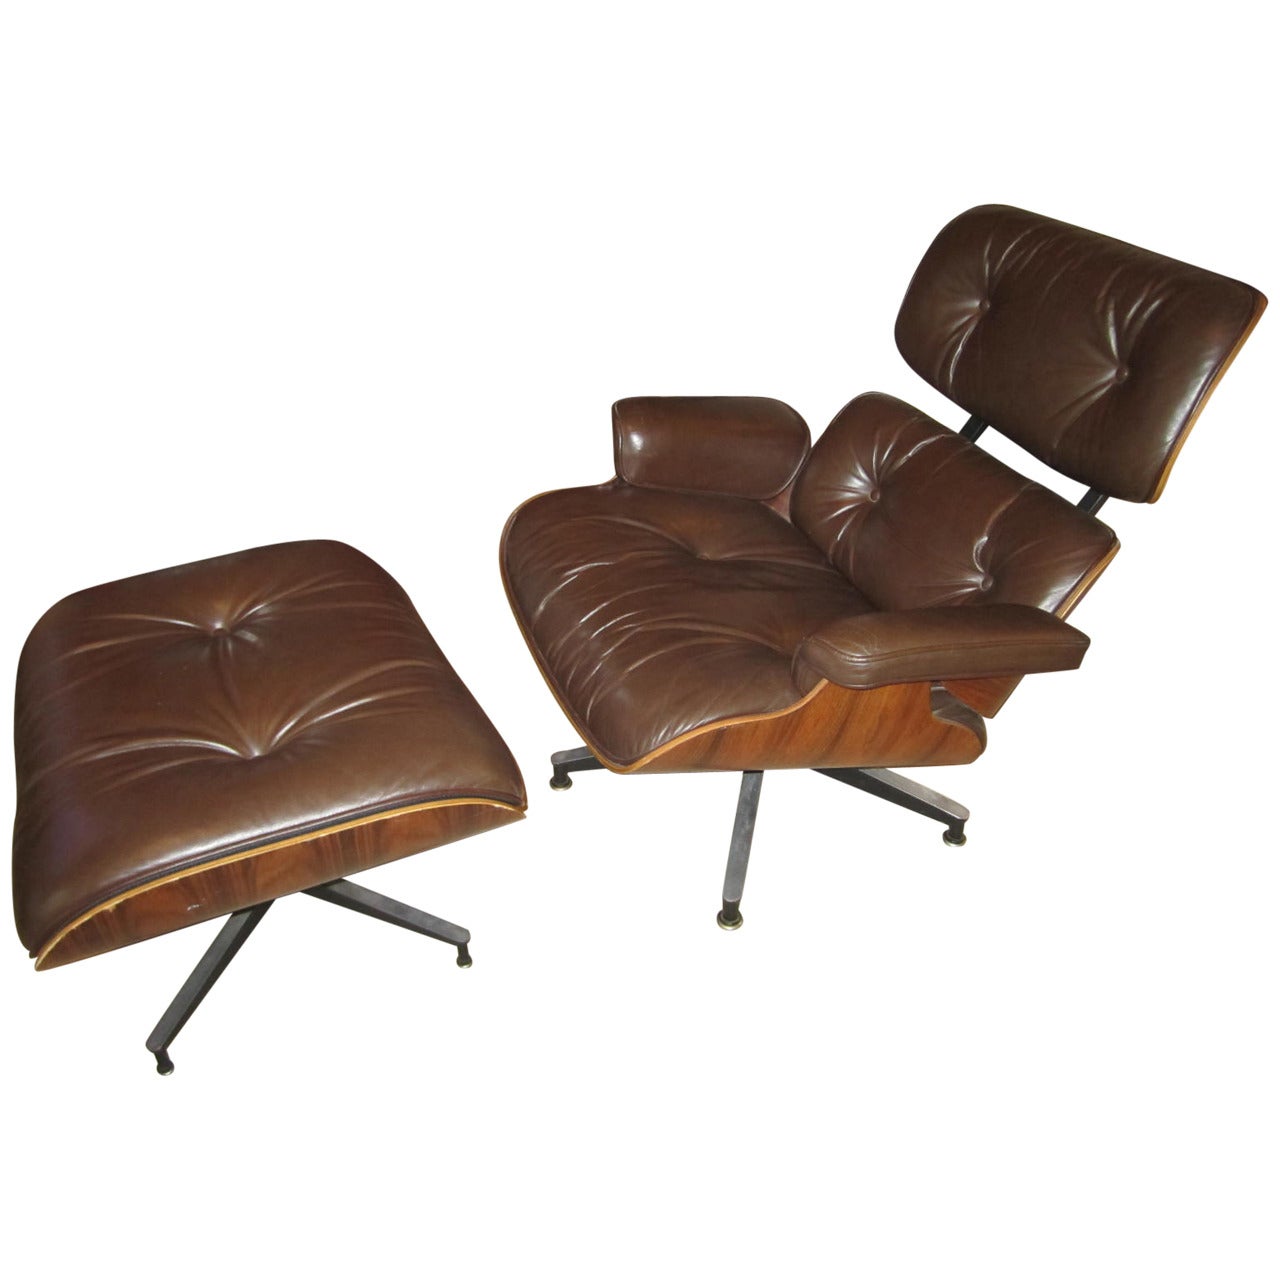 Eames Rosewood 670 Lounge Chair and Ottoman by Herman Miller Mid-Century Modern